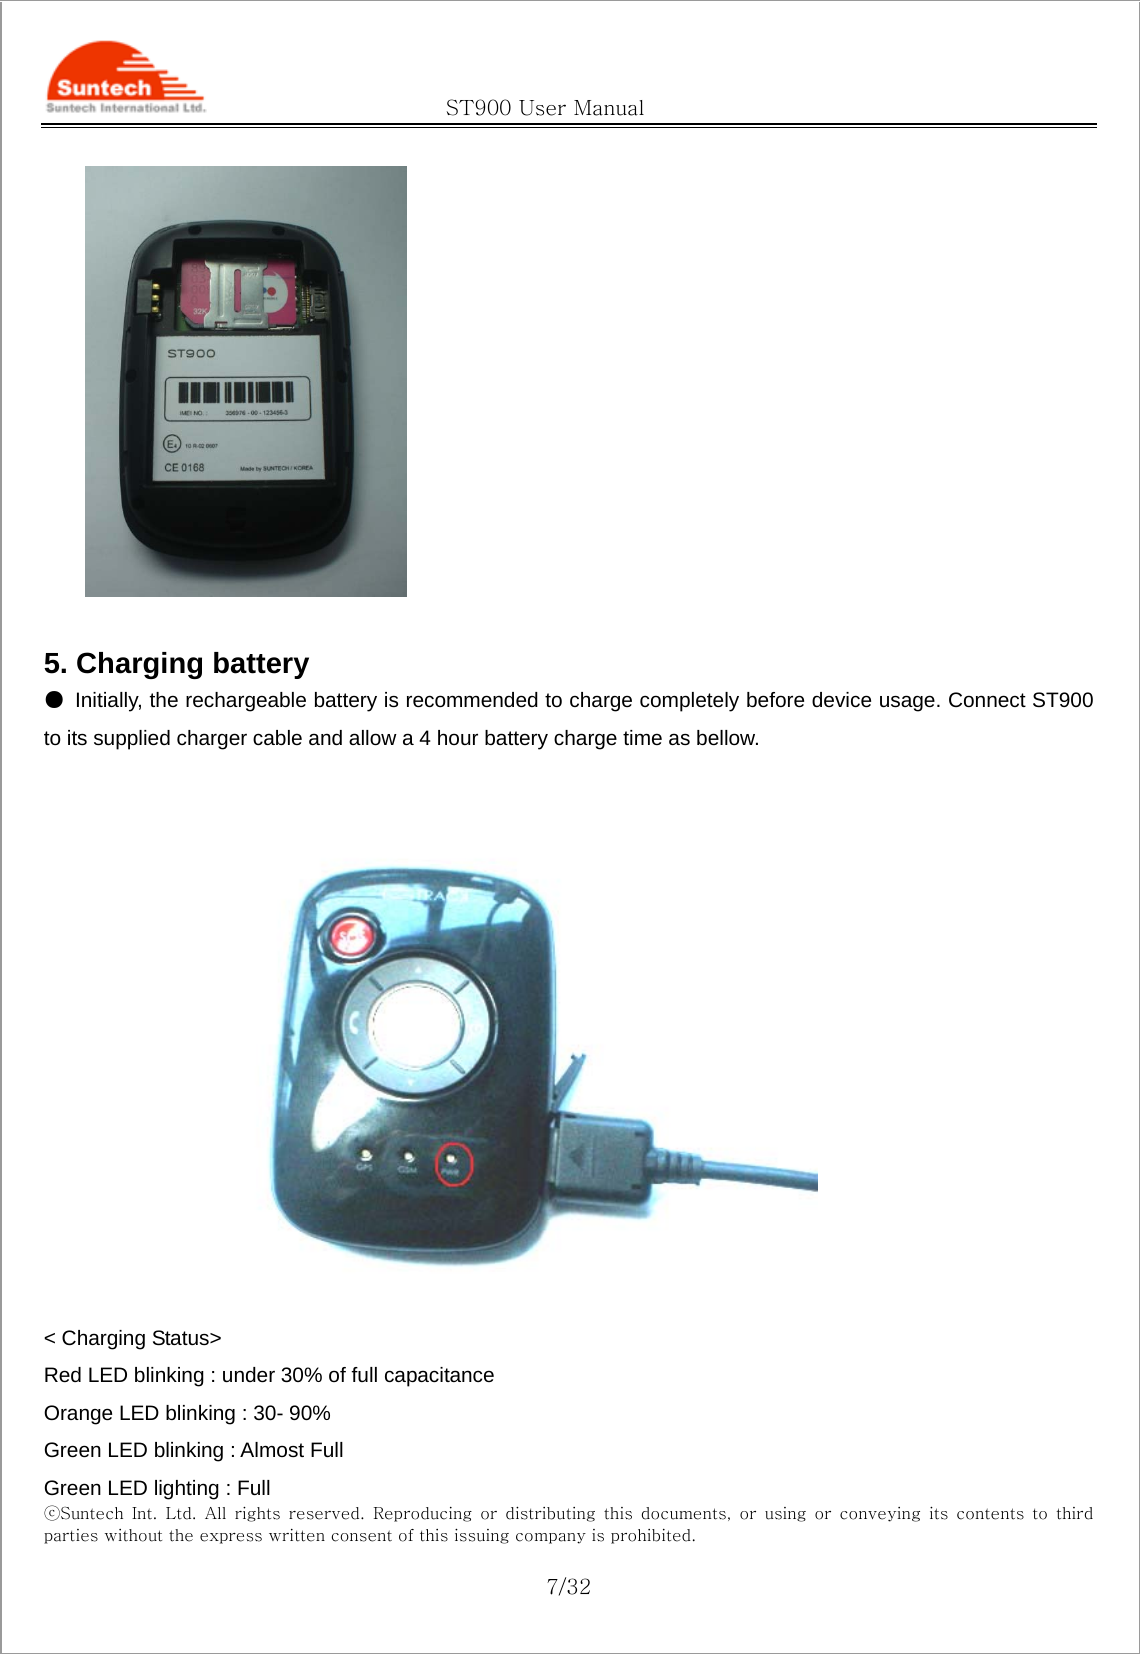                                               ST900 User Manual ⓒSuntech  Int.  Ltd.  All  rights  reserved.  Reproducing  or  distributing this documents, or using or conveying its contents to third parties without the express written consent of this issuing company is prohibited.  7/32   5. Charging battery ●  Initially, the rechargeable battery is recommended to charge completely before device usage. Connect ST900 to its supplied charger cable and allow a 4 hour battery charge time as bellow.   &lt; Charging Status&gt; Red LED blinking : under 30% of full capacitance Orange LED blinking : 30- 90% Green LED blinking : Almost Full Green LED lighting : Full 